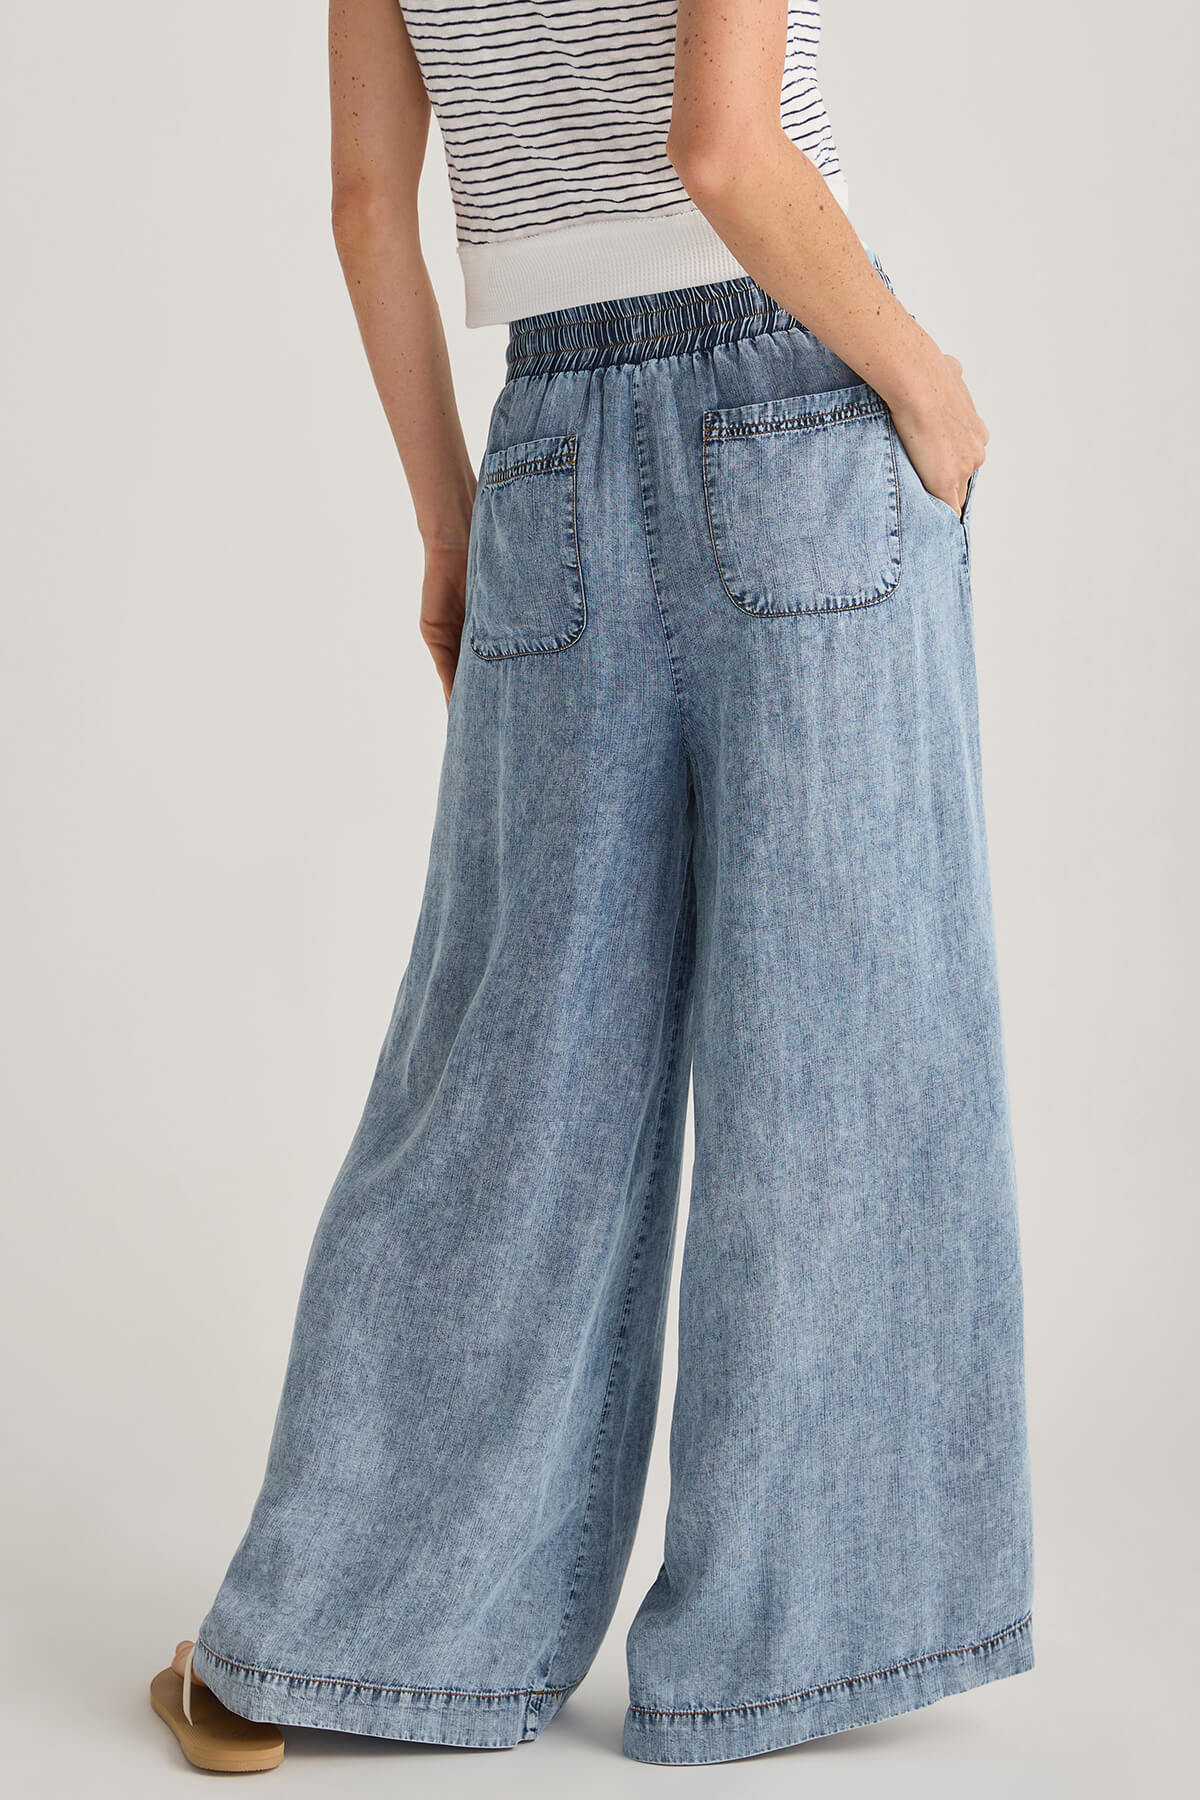 Eesome Mineral Washed Wideleg Pants